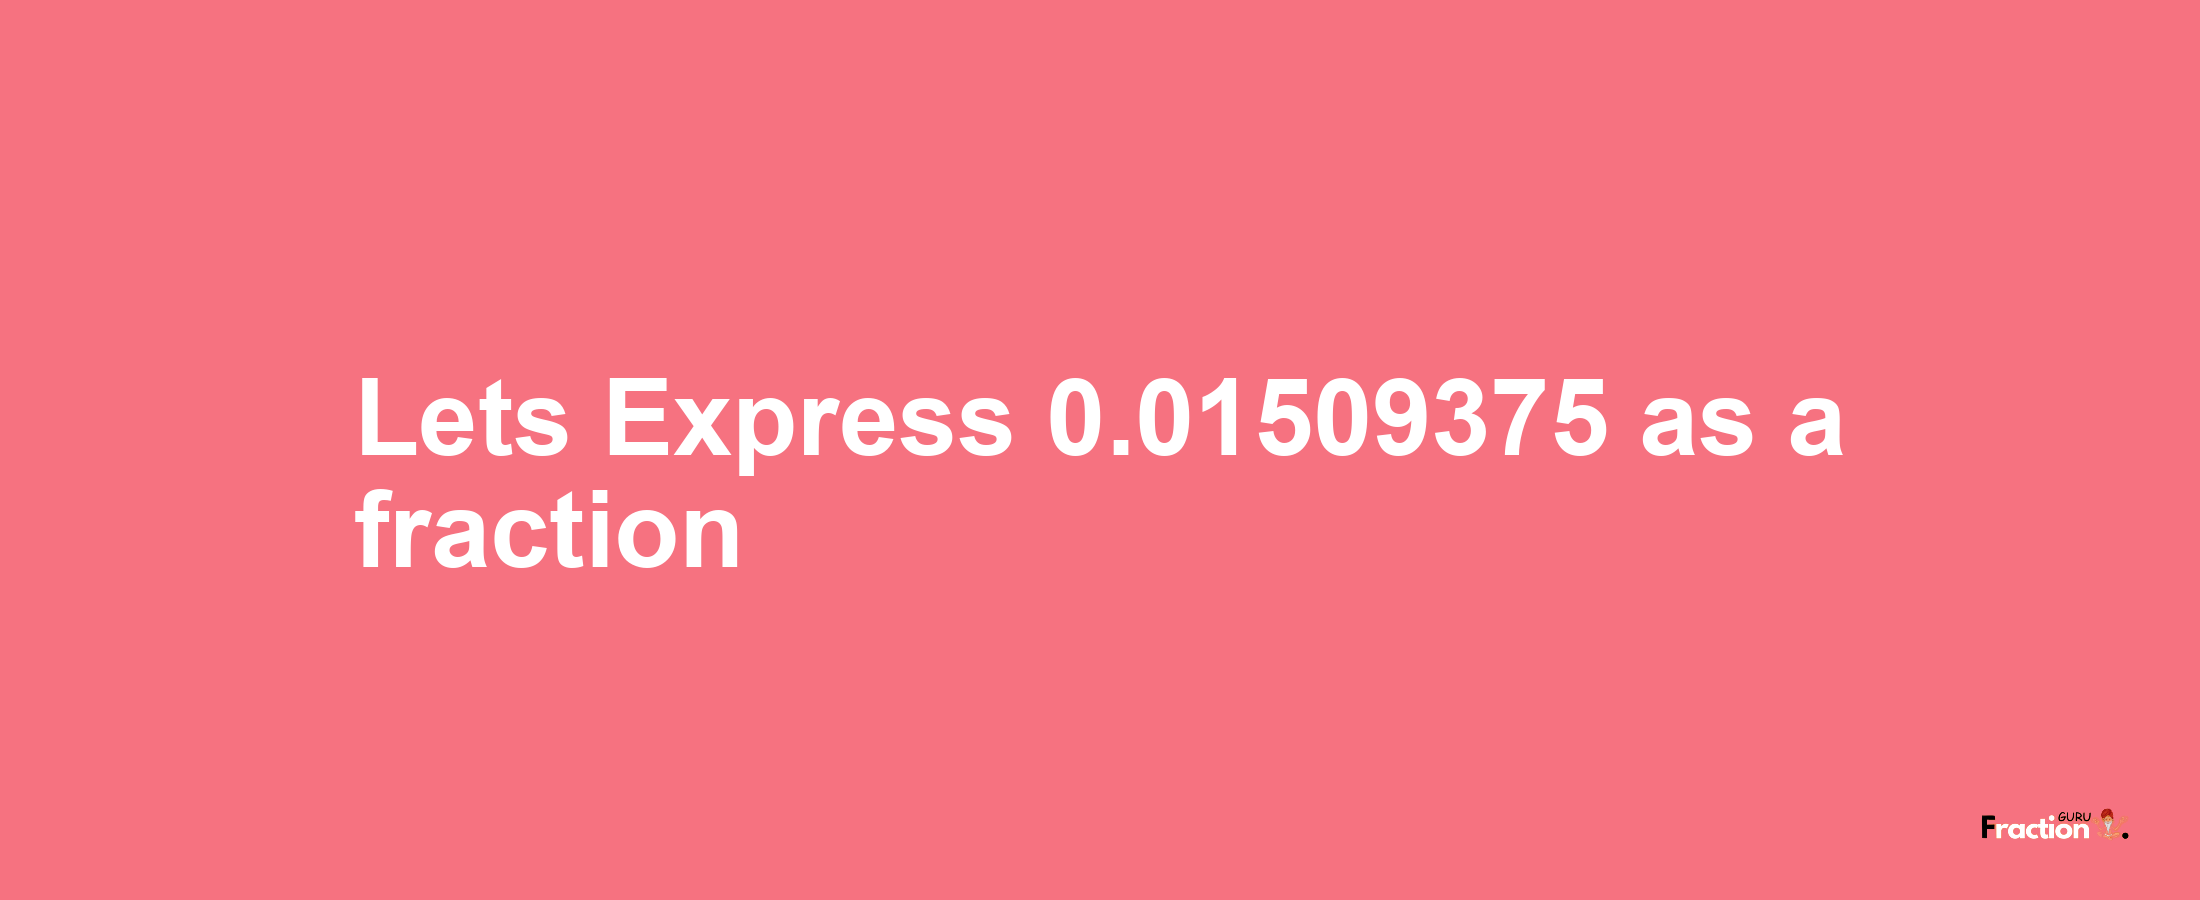 Lets Express 0.01509375 as afraction